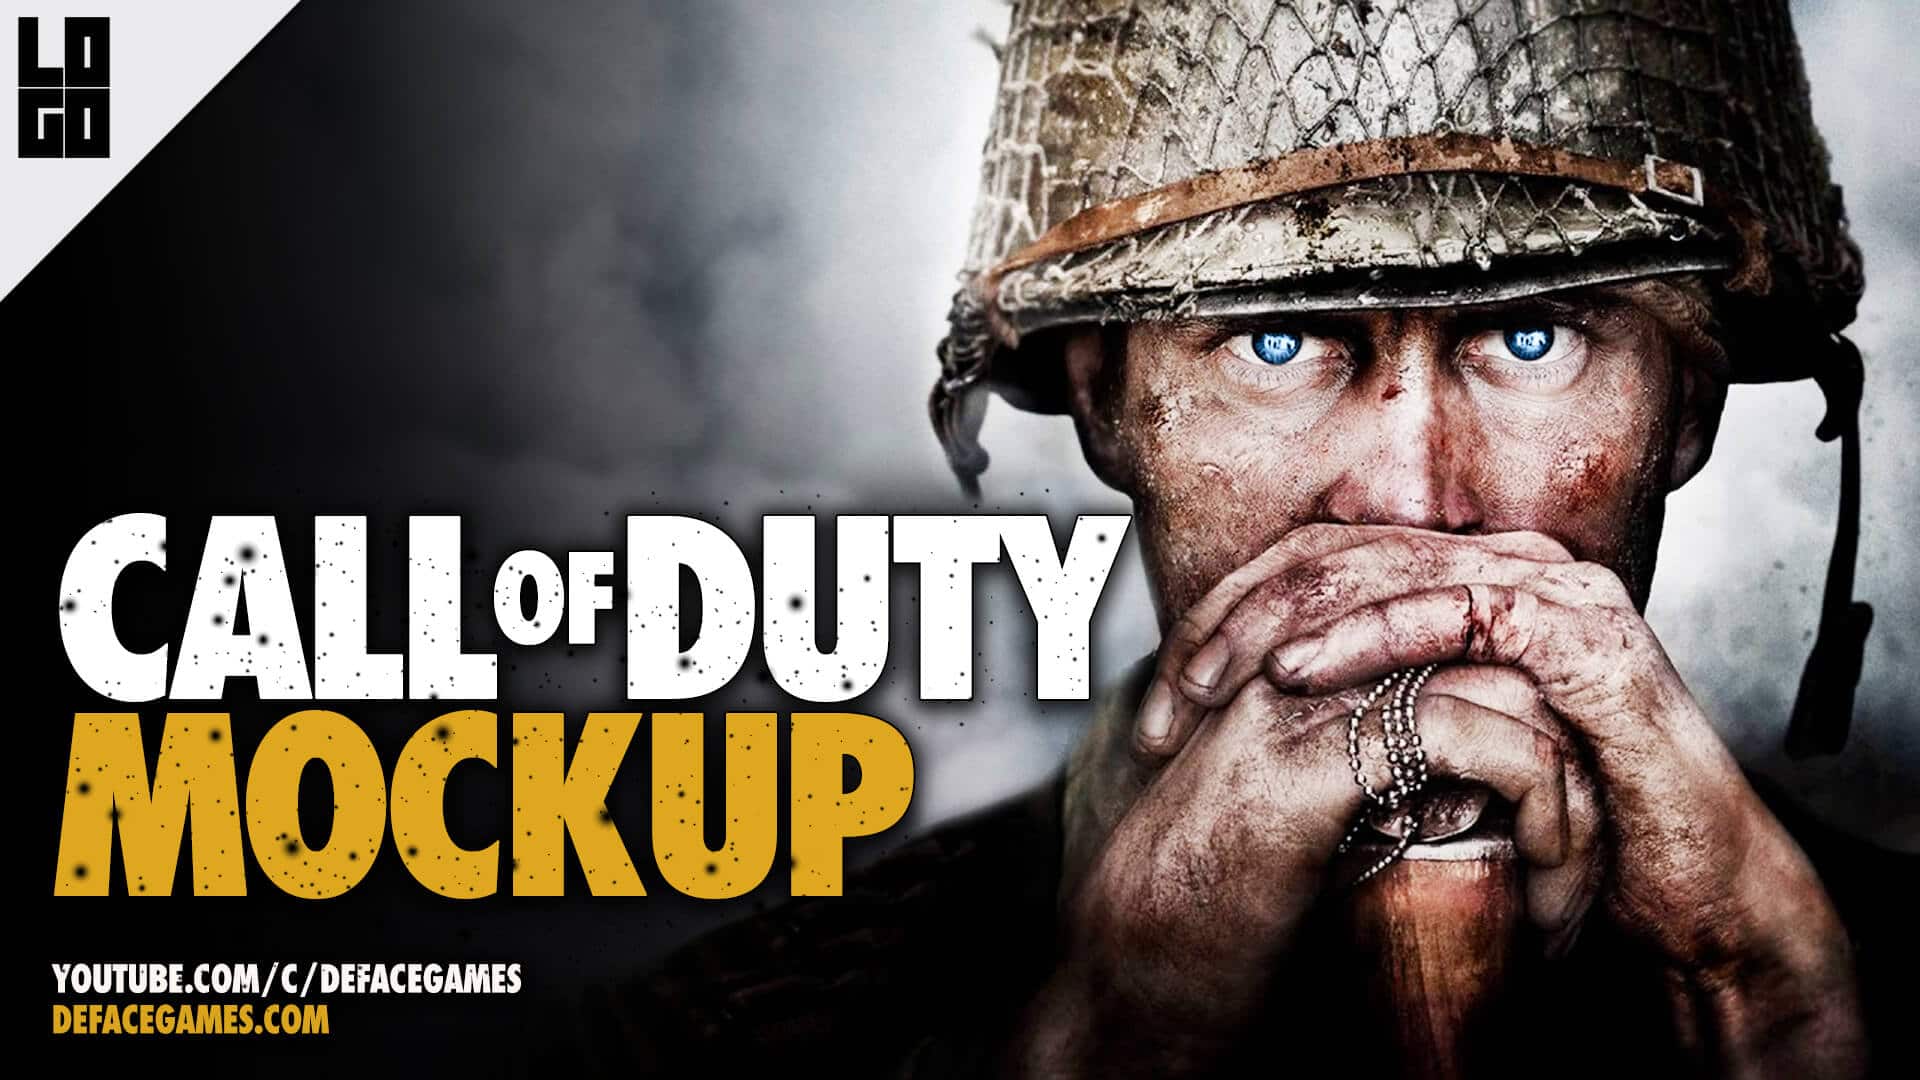 call of duty ww2 pc download